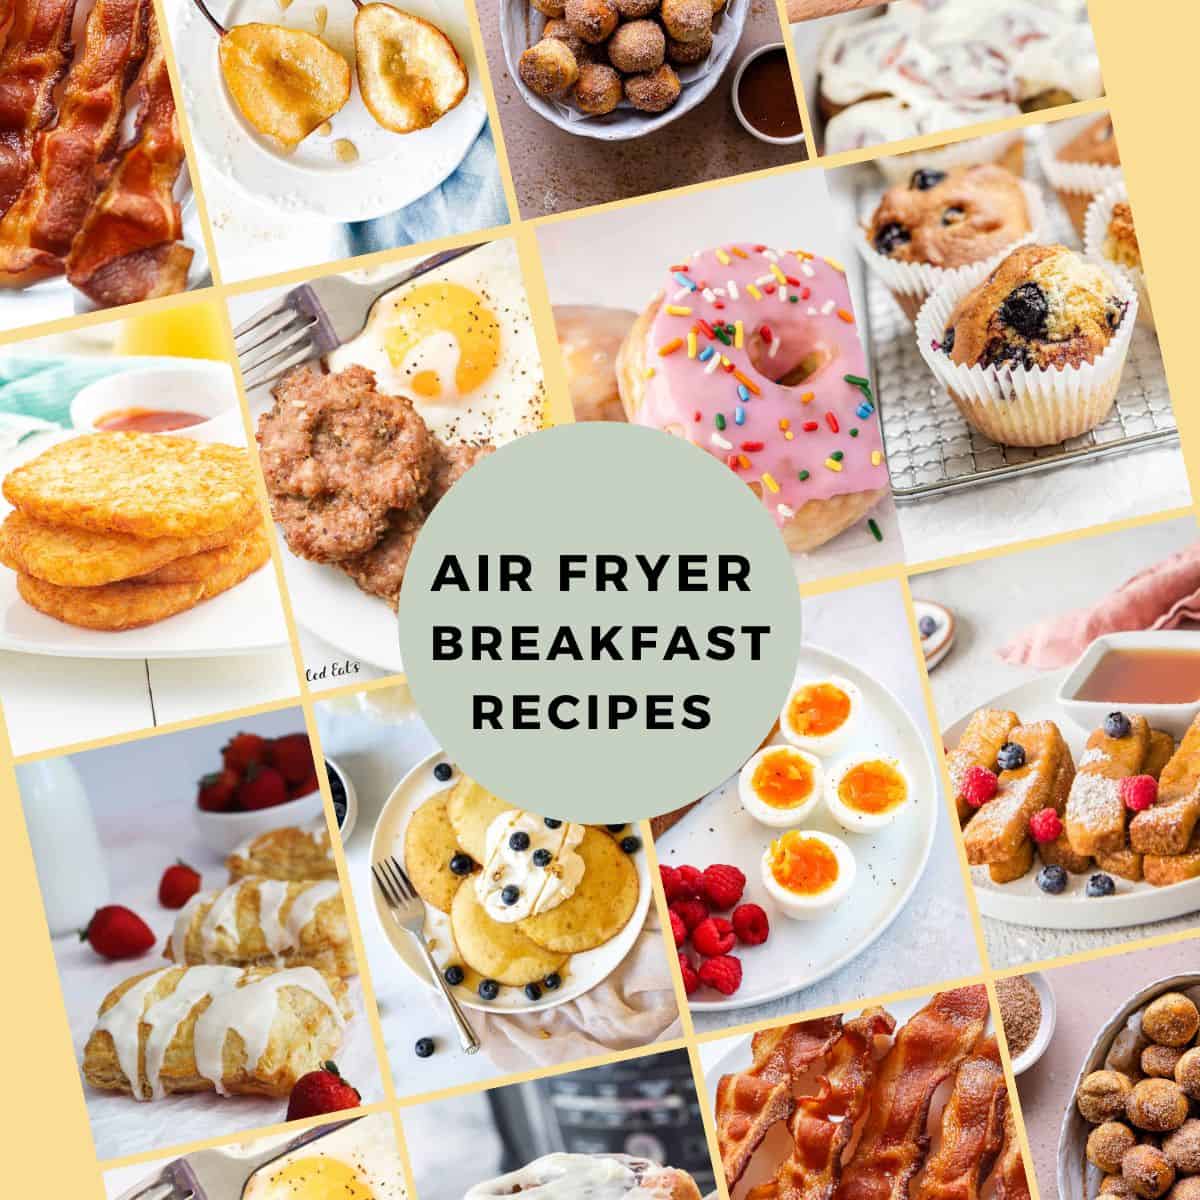 An image collage of a variety of air fryer breakfast recipes.